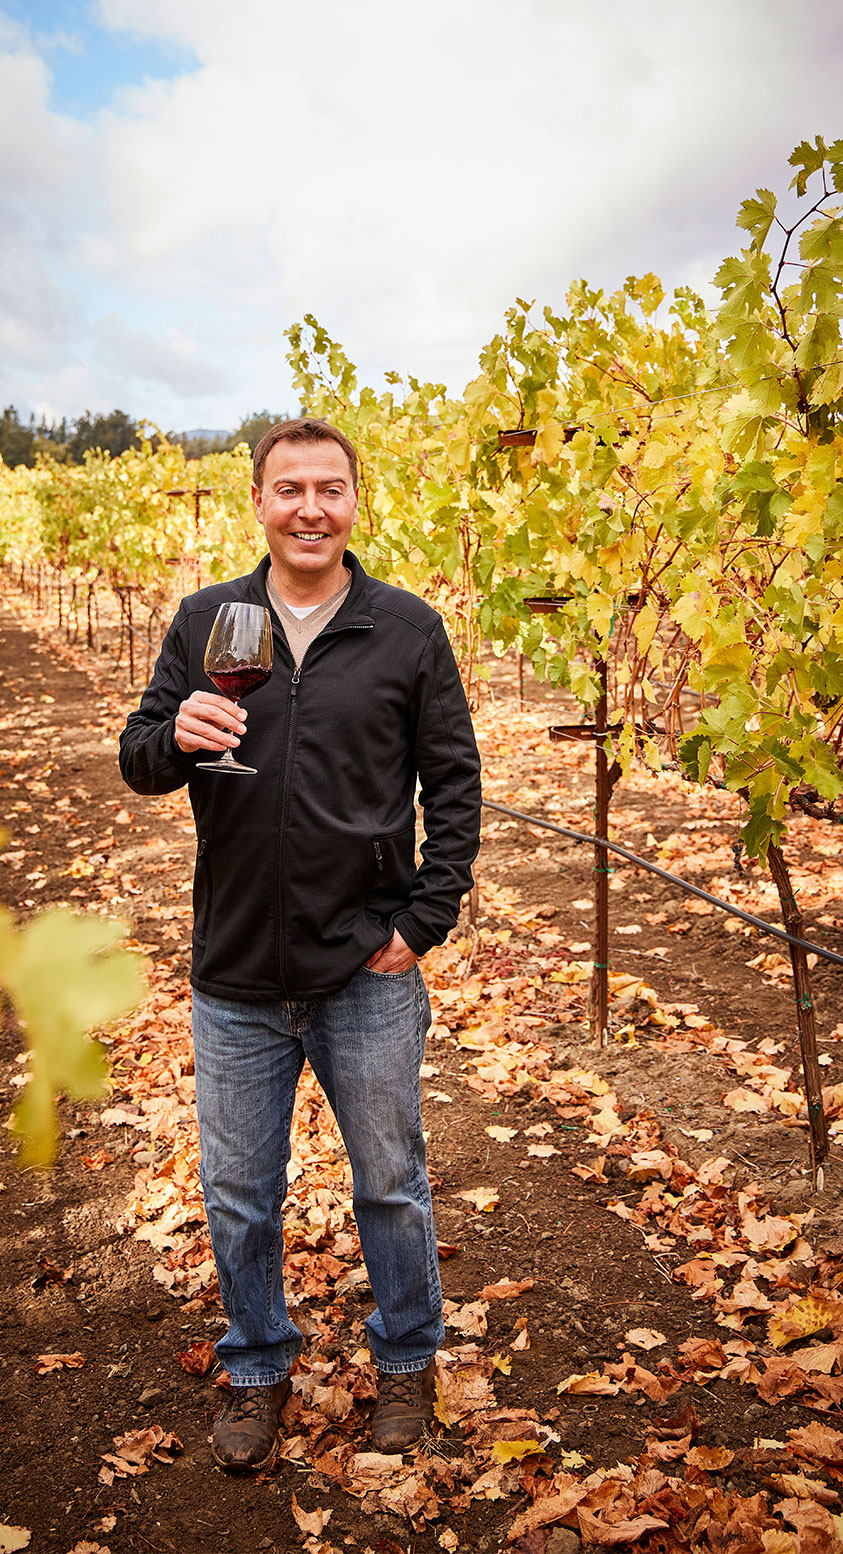 Bread & Butter Winemaker Matt Shuplock standing in the vineyards during autumn with a glass of red wine